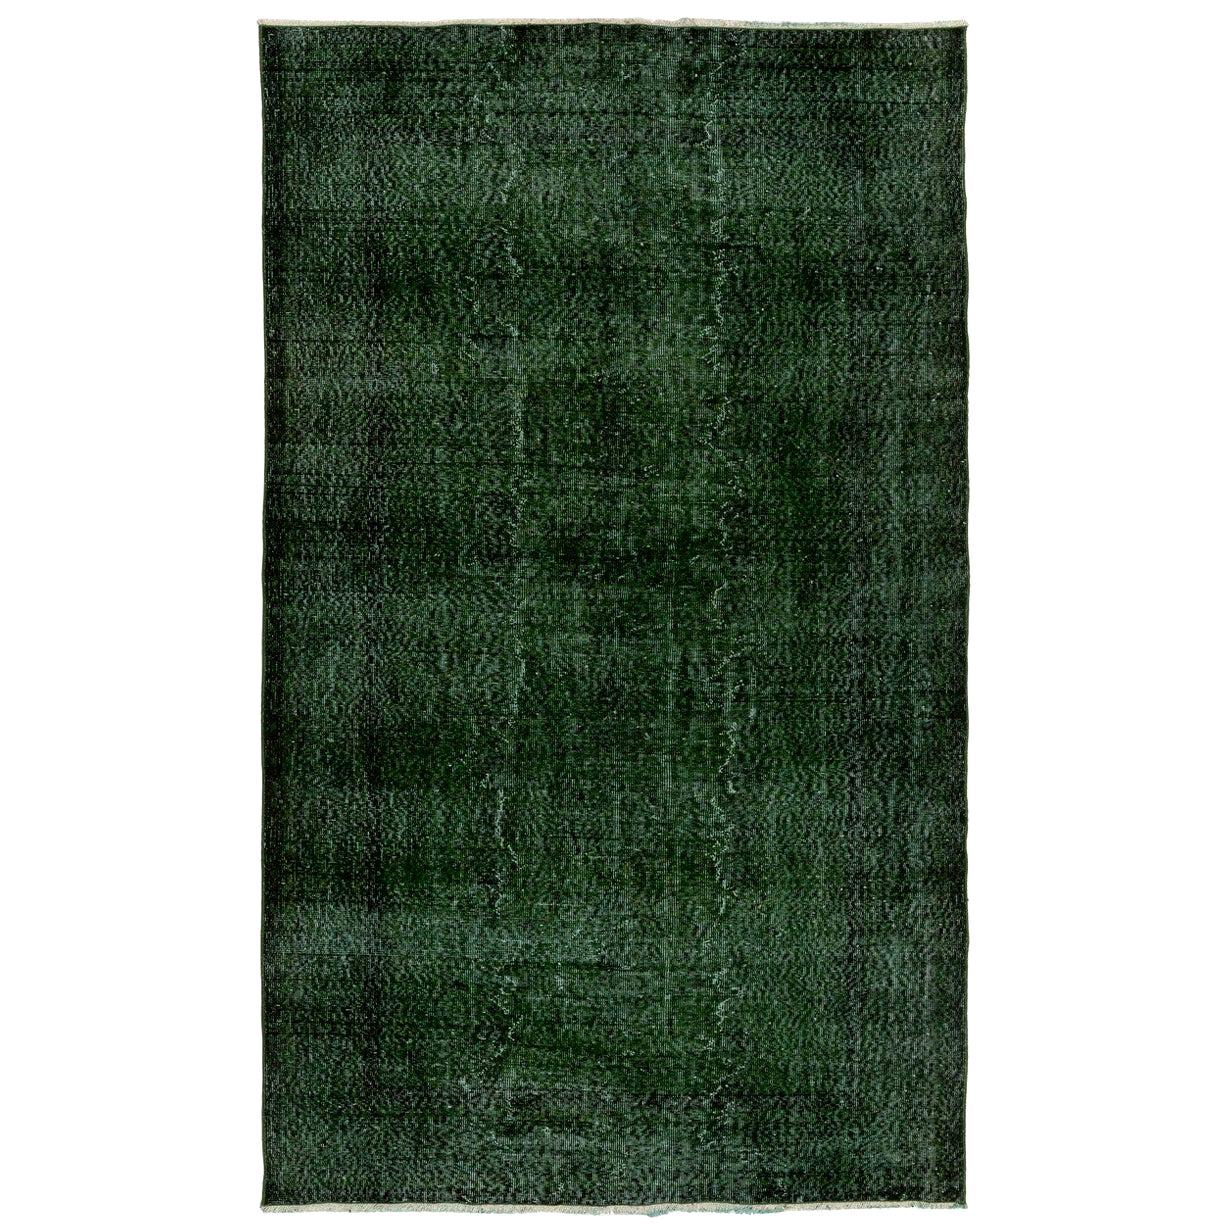  6x9 ft Vintage Distressed Handmade Turkish Area Rug Over-dyed in Dark Emerald